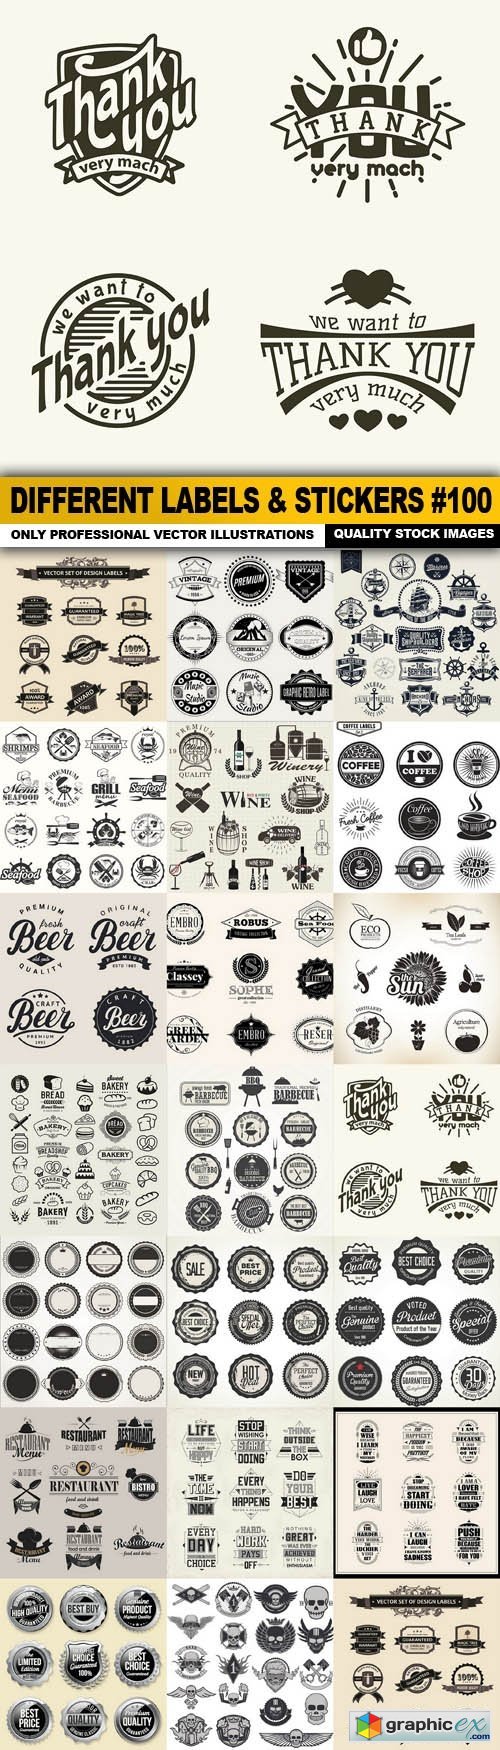 Different Labels & Stickers #100